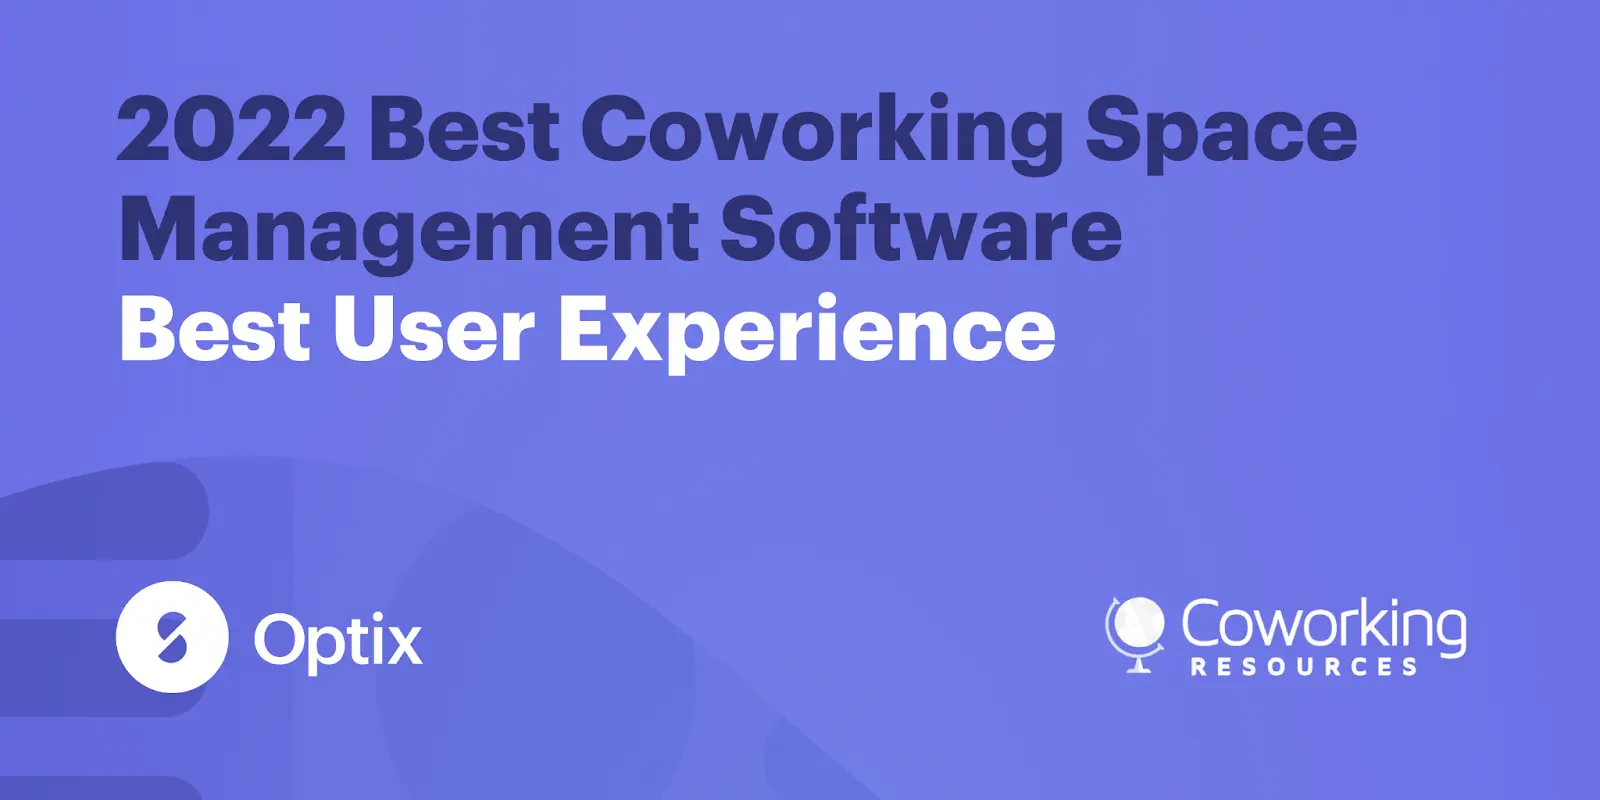 Optix coworking software for member experience